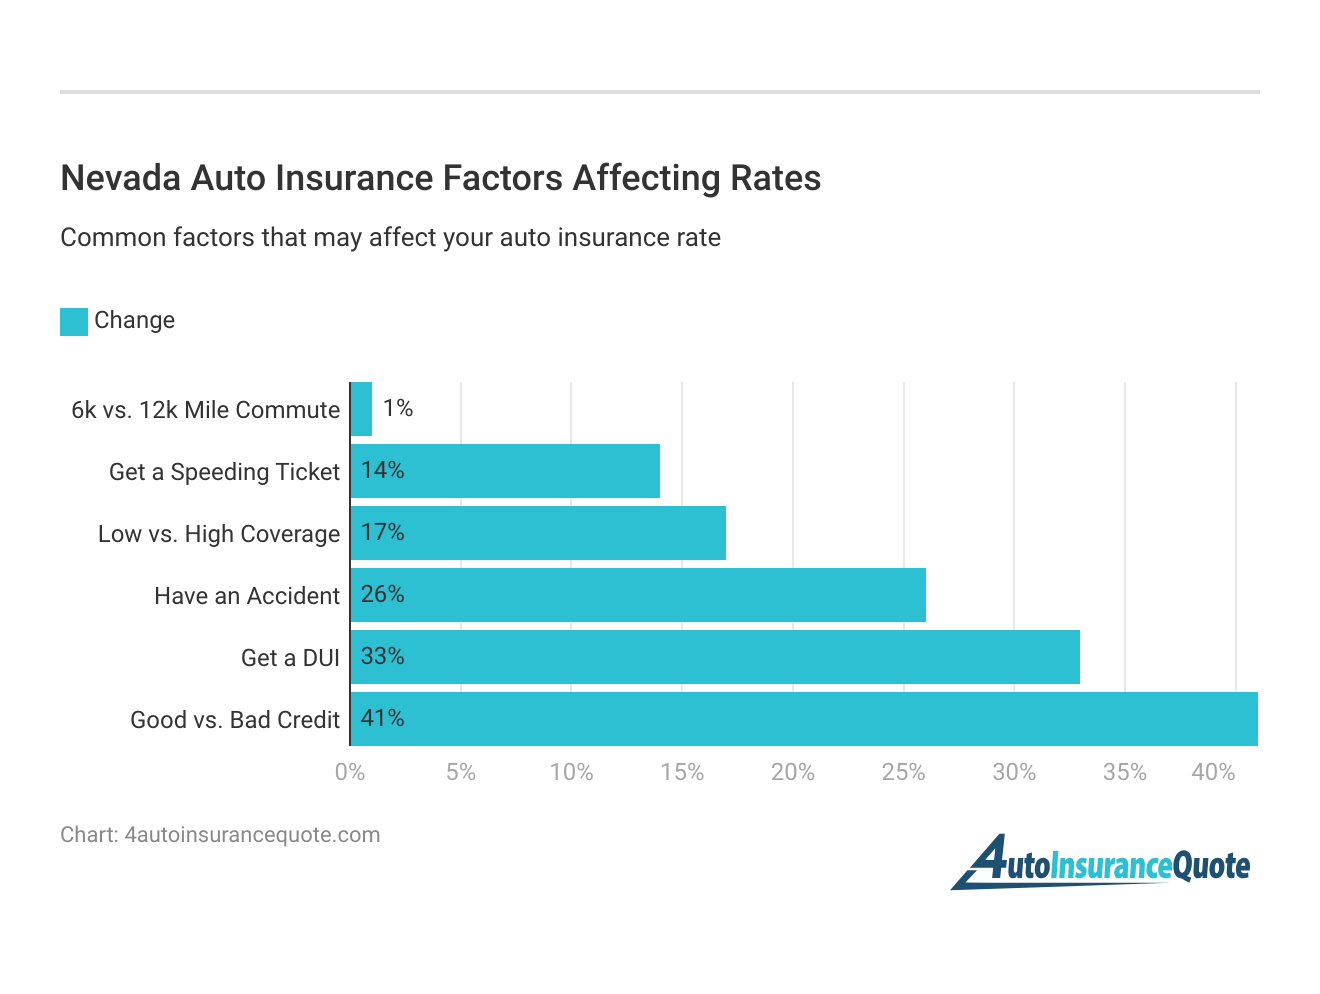 <h3>Nevada Auto Insurance Factors Affecting Rates</h3>